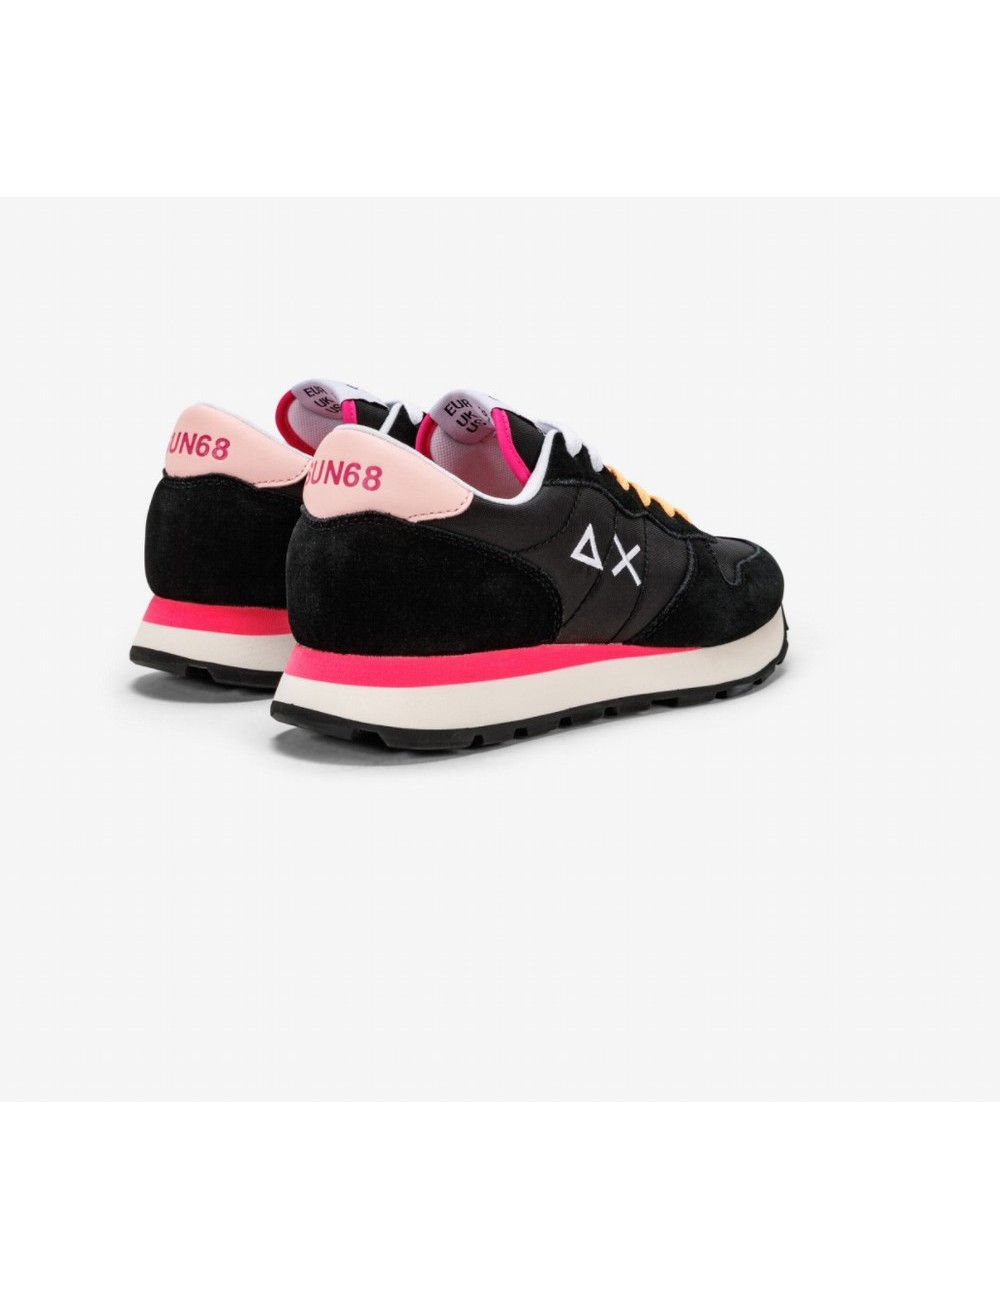 SNEAKERS MUJER SUN 68 ALLY SOLID NYLON NEGRO